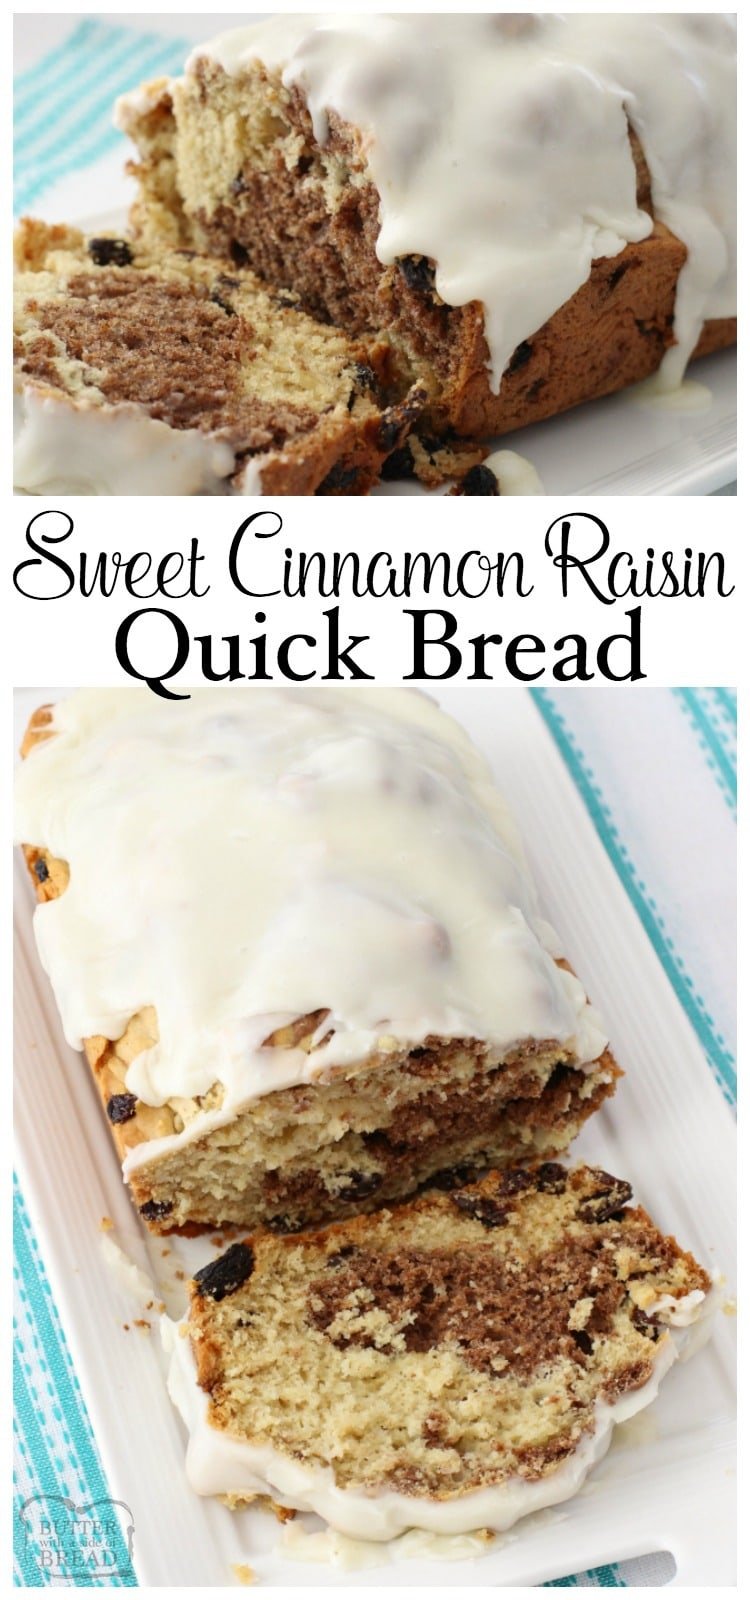 No yeast needed for this soft Sweet Cinnamon Raisin Quick Bread! Easy to make with a lovely flavor & texture, you've got to save this recipe! Butter With A Side of Bread